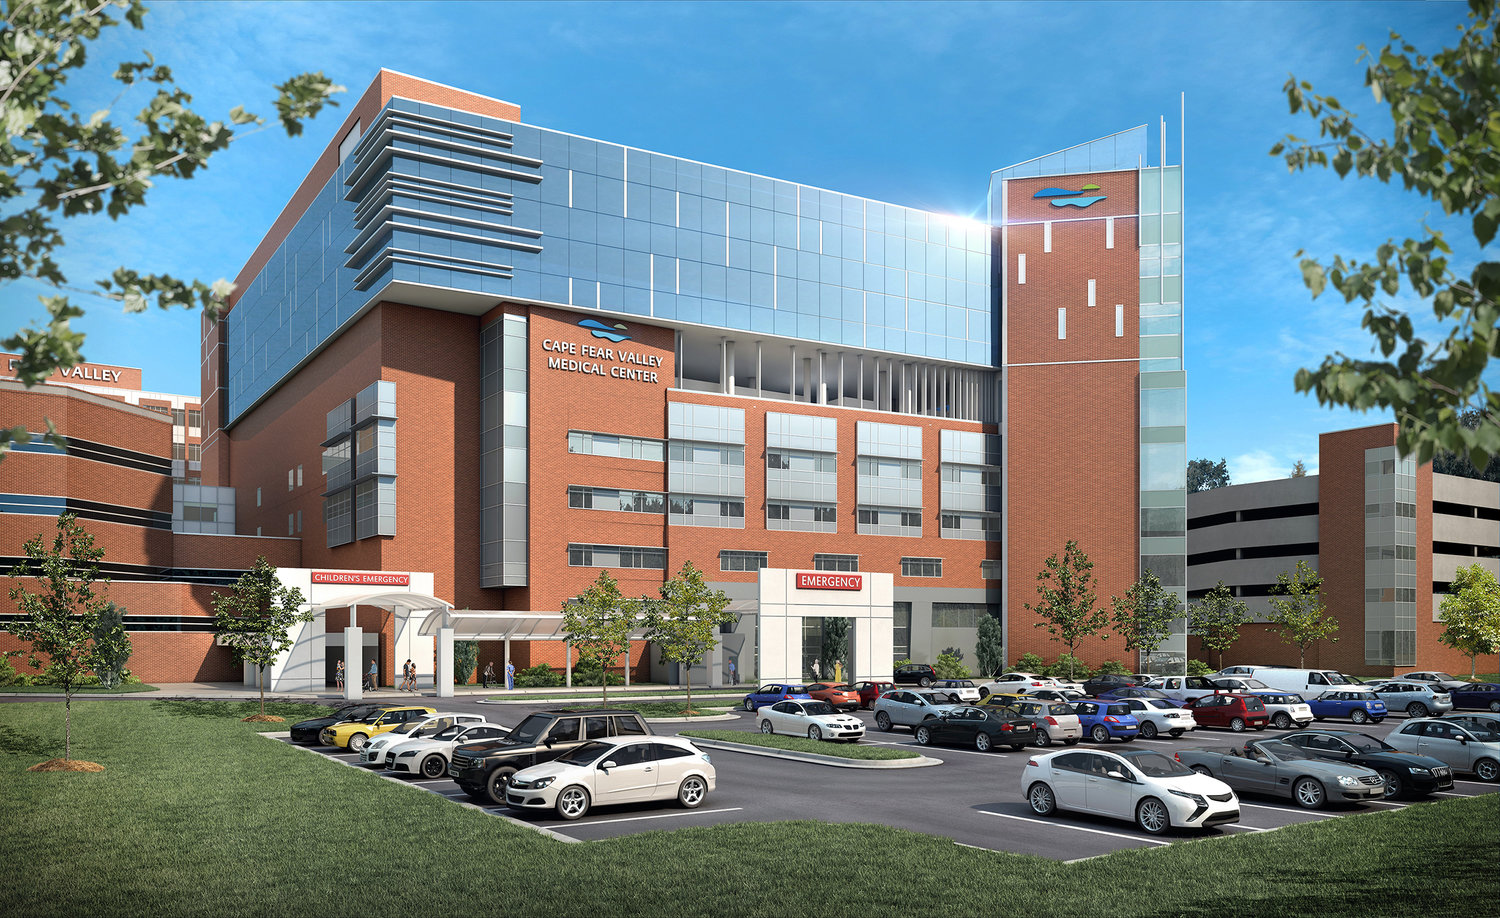 An artist’s rendering of the proposed $110 million expansion to Cape Fear Valley Medical Center that will add 100 beds. Motorists traveling near the hospital and visitors to the campus may see a few disruptions over the next few months related to the project, health system officials say.